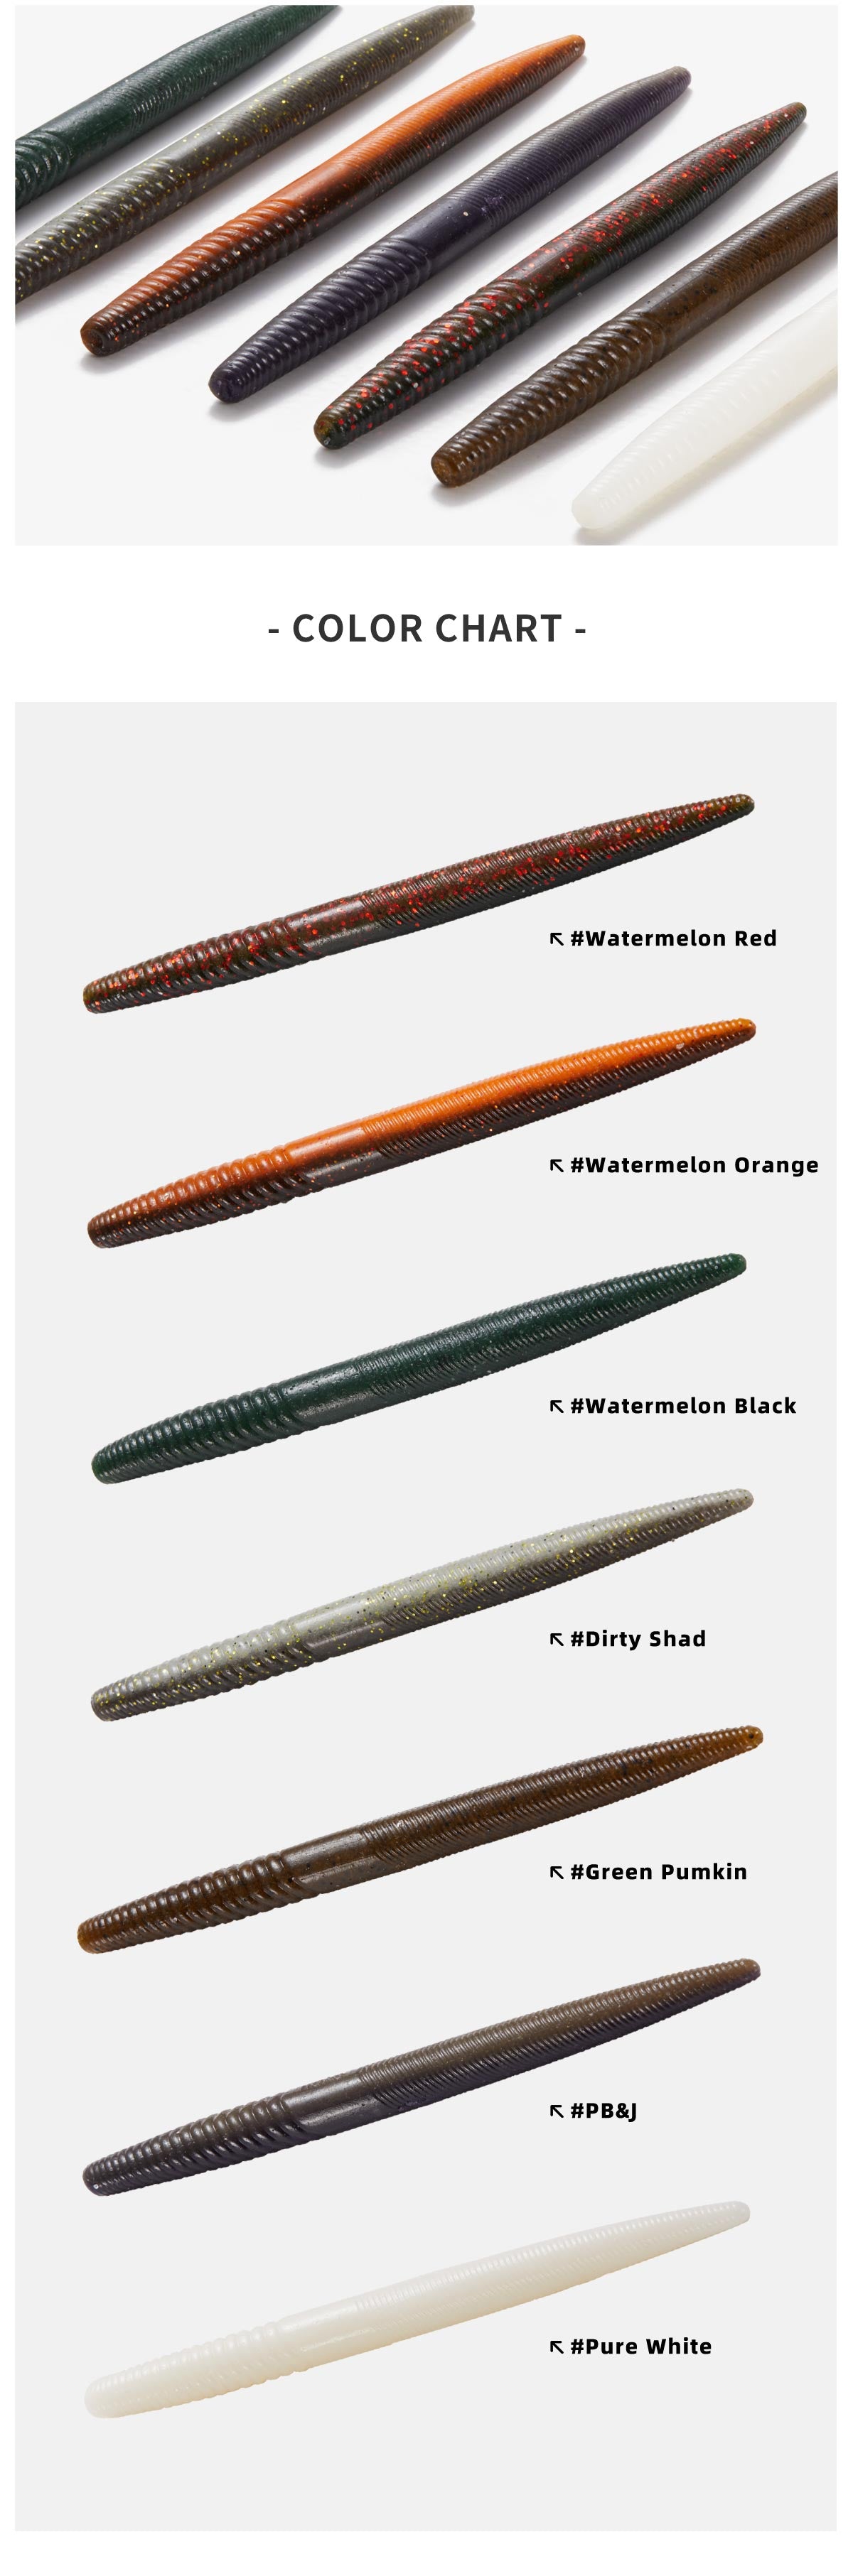 Fatty worm color chart